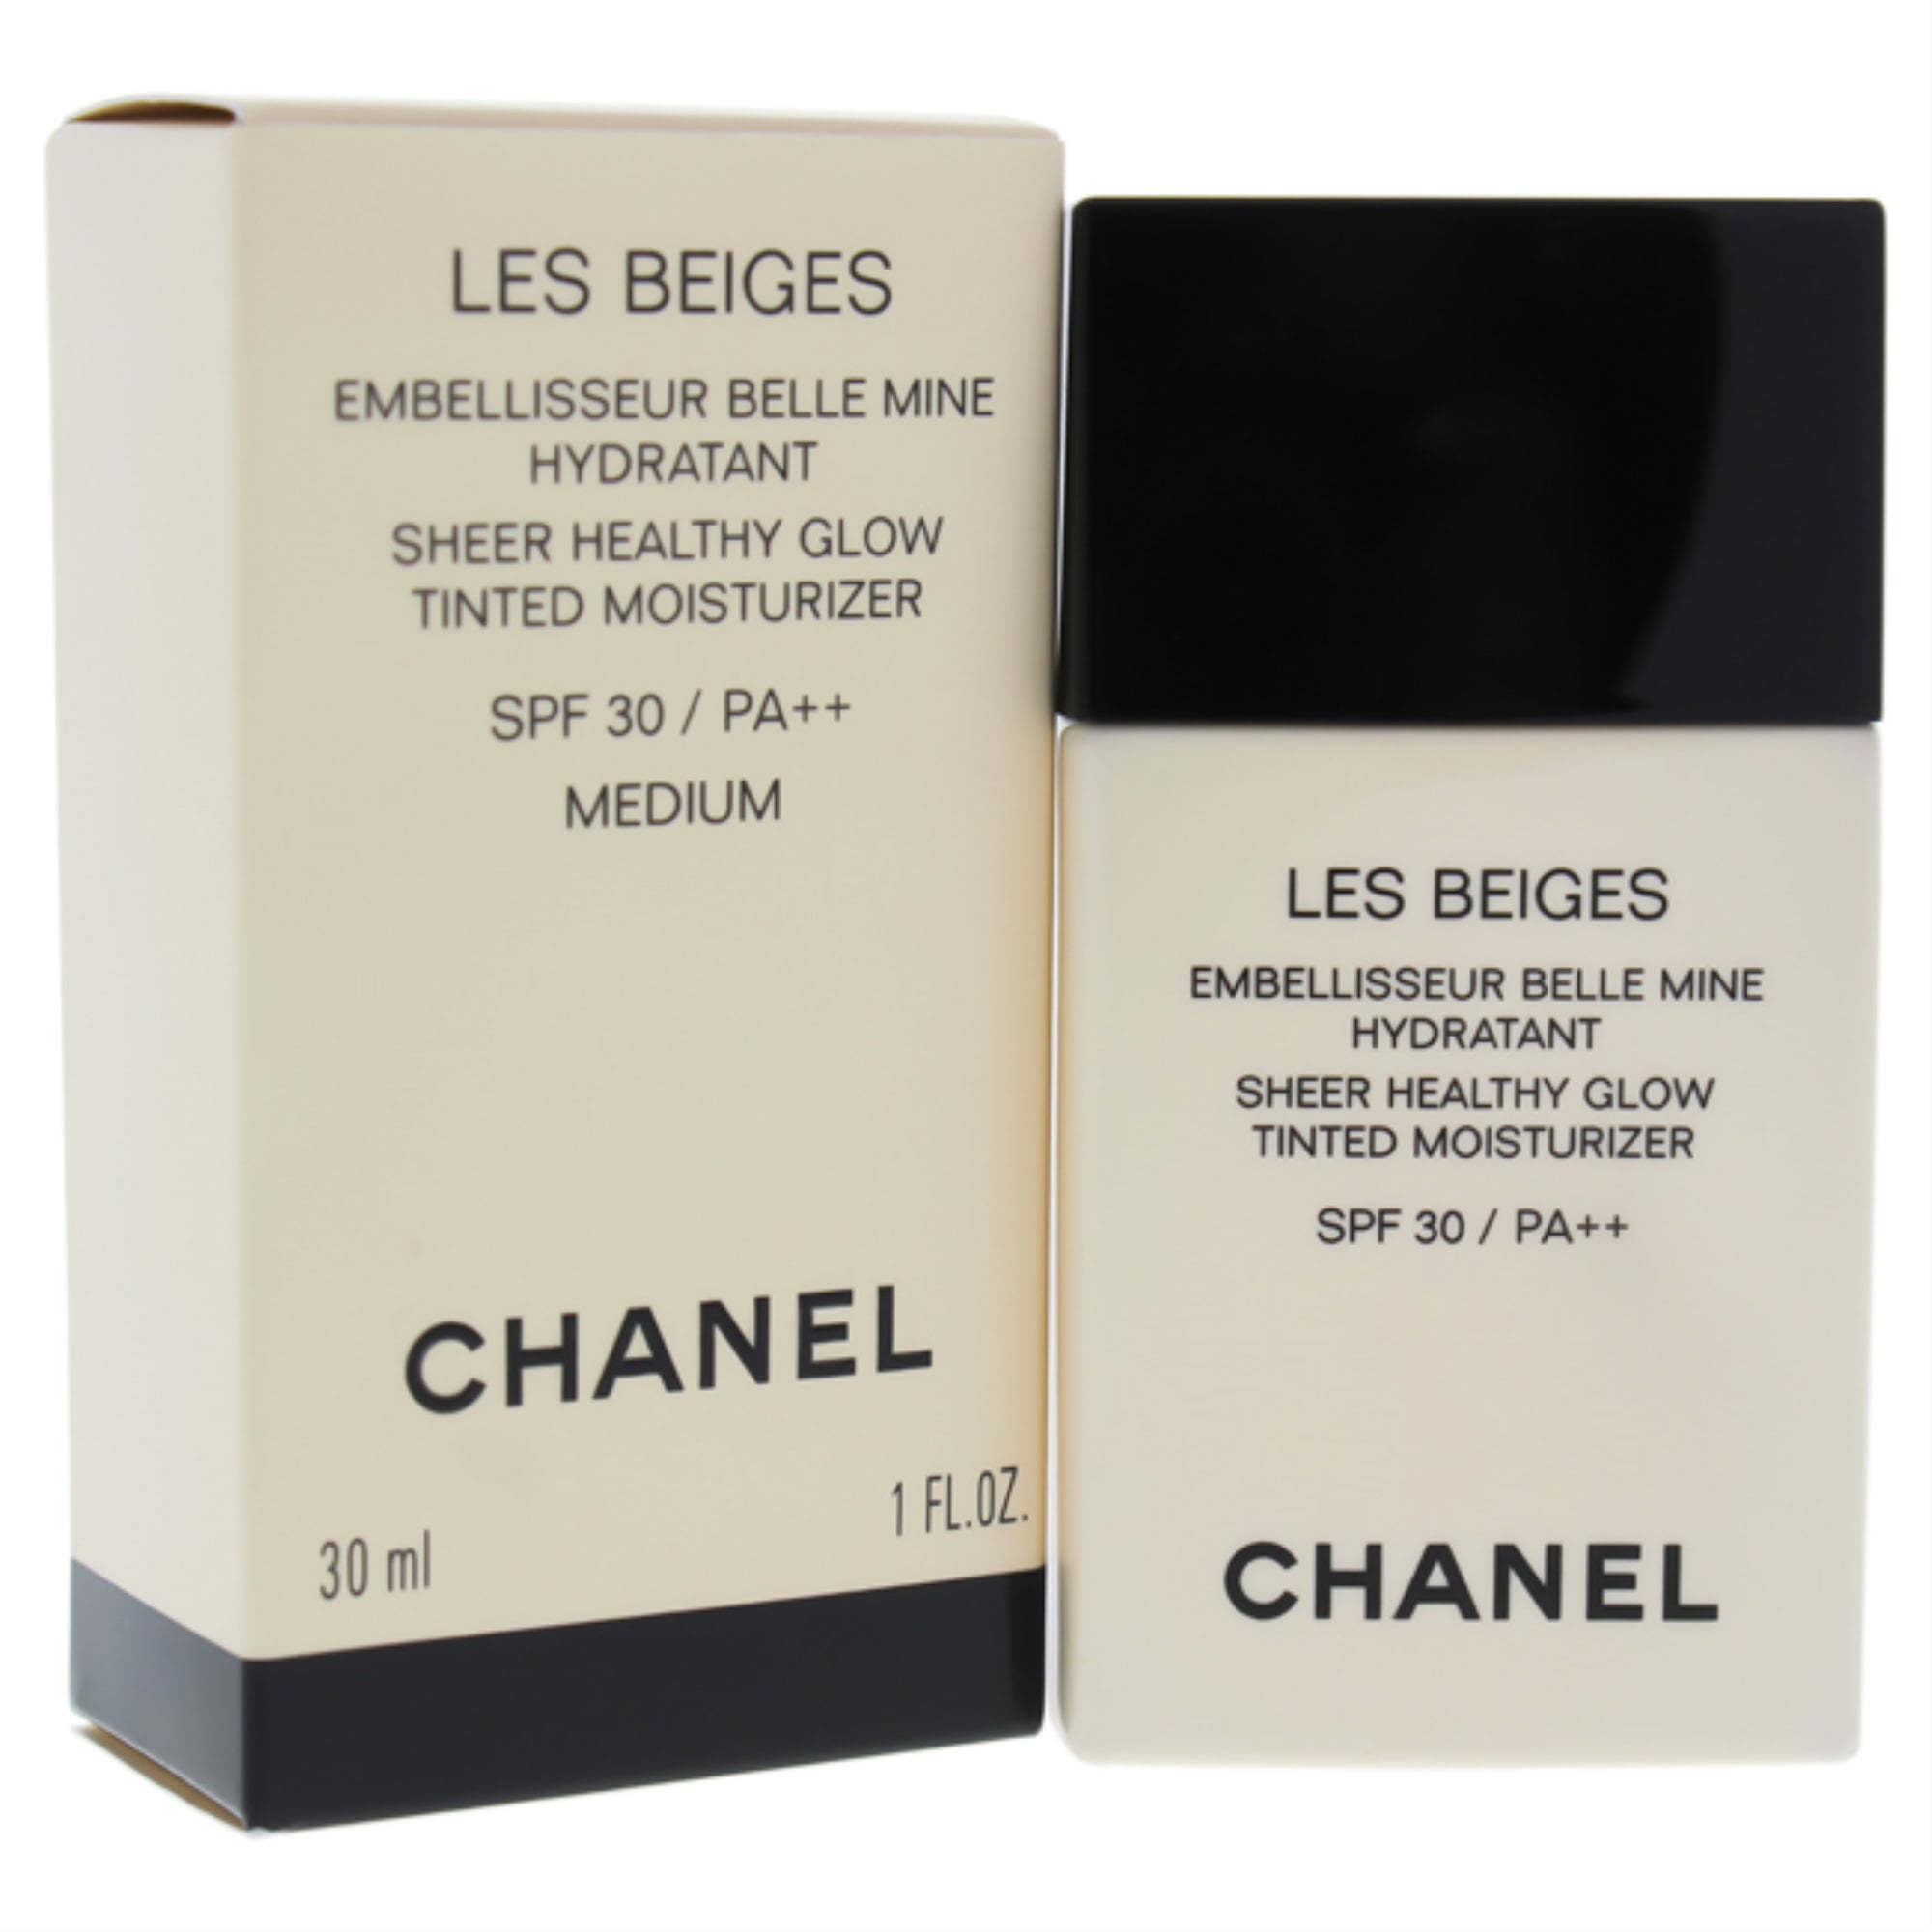 Les Beiges Sheer Healthy Glow Moisturizing Tint SPF 30 - Medium by Chanel  for Women - 1 oz Makeup